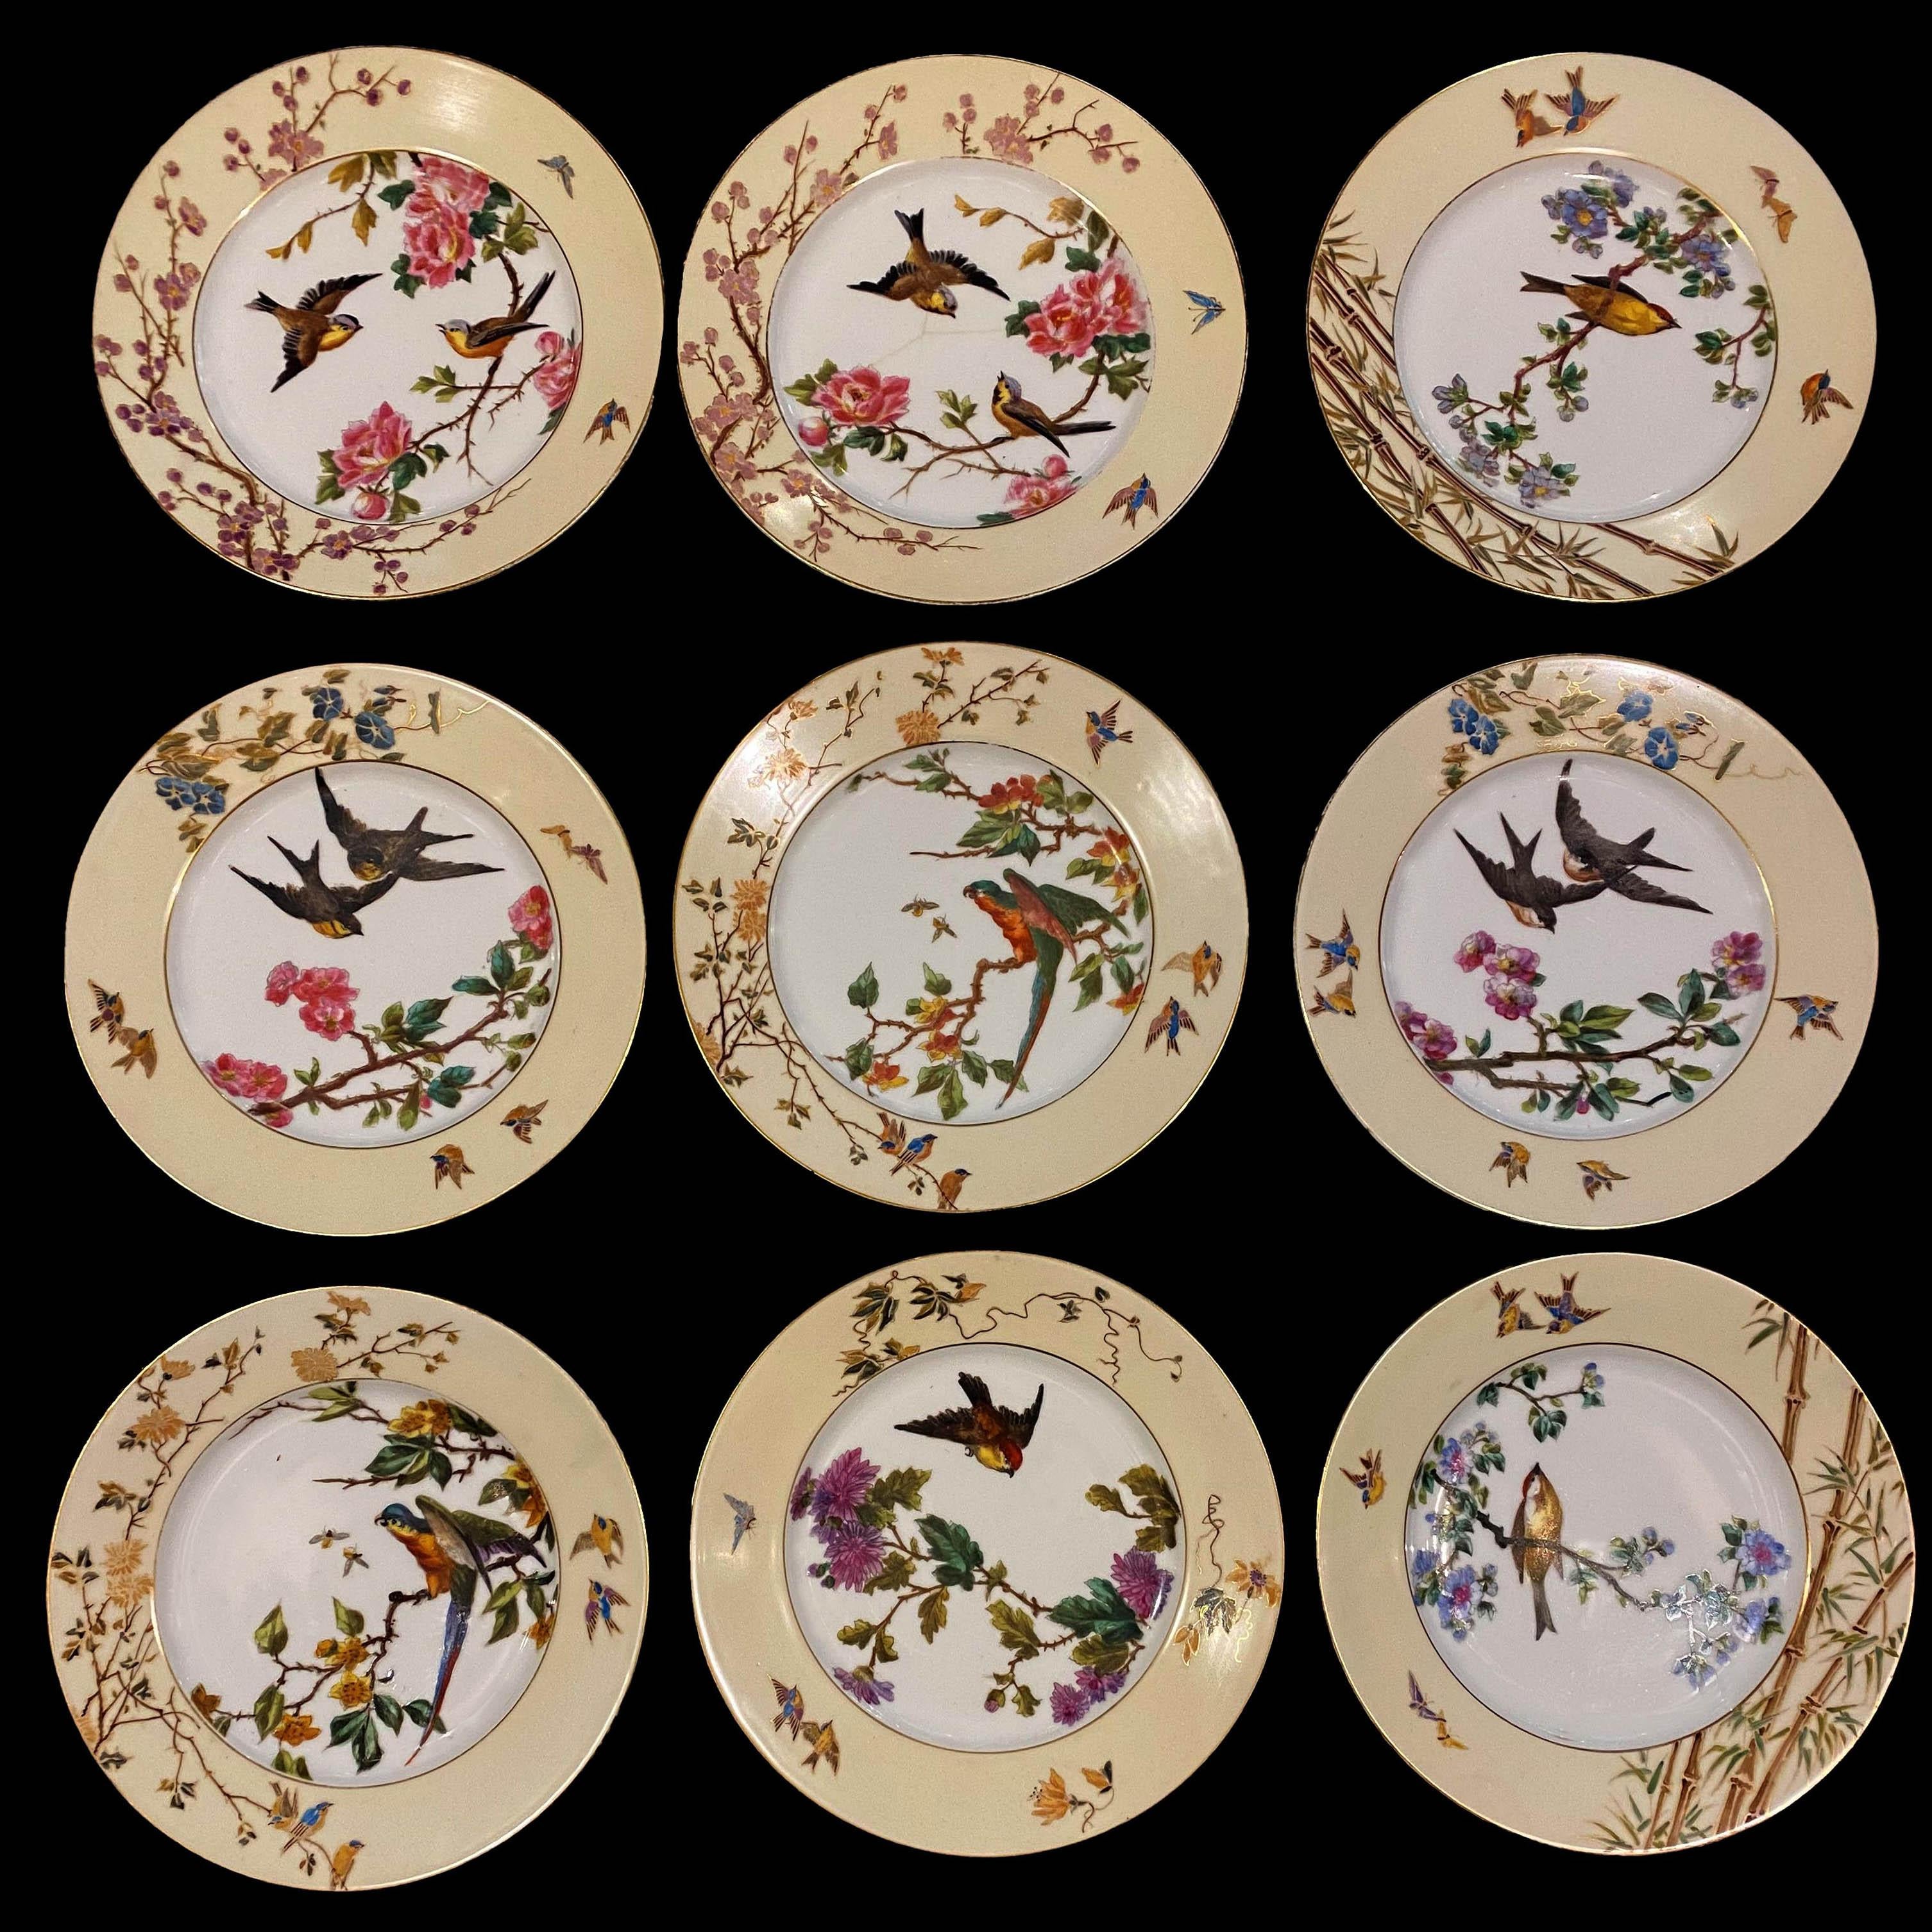 Aesthetic Movement 19th Dinner Set 57 Pieces Limoges by Charles Field Haviland 1